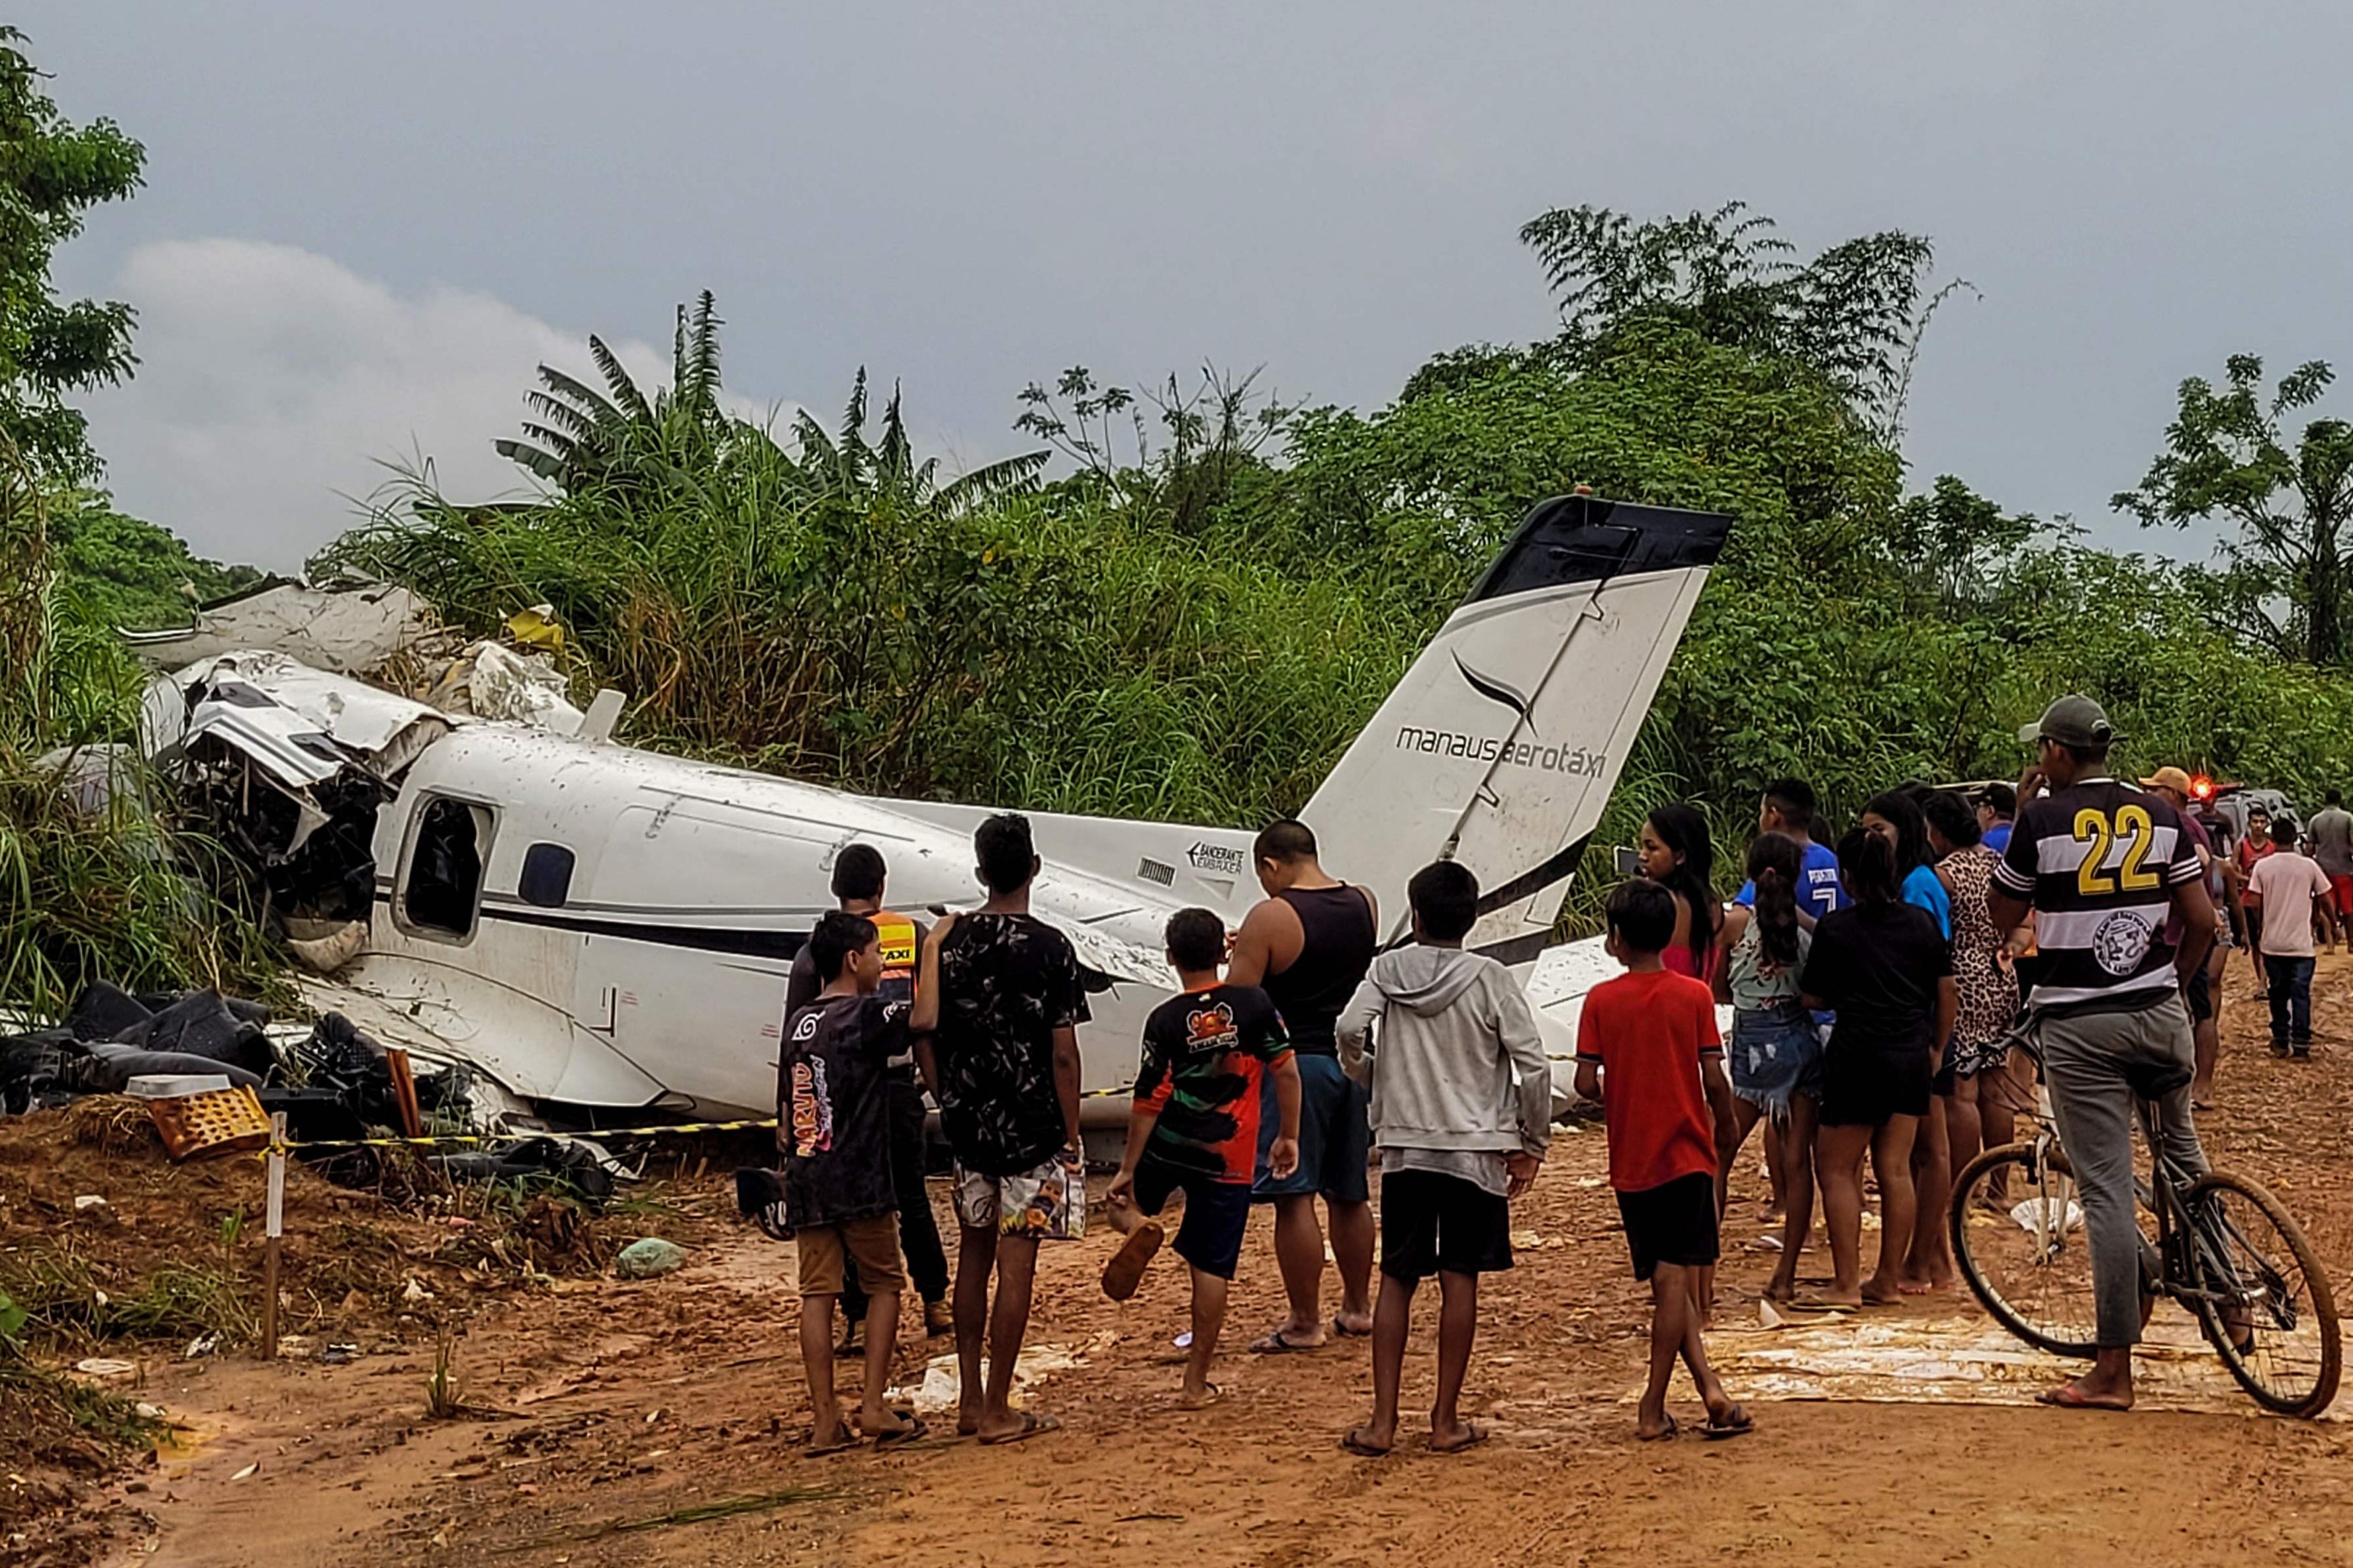 <p>People stand looking at the site where an Embraer EMB-110 aircraft of the Manaus Aerotaxi airline crashed, causing the deaths of 14 people during the plane's landing the previous day at Barcelos airport</p>